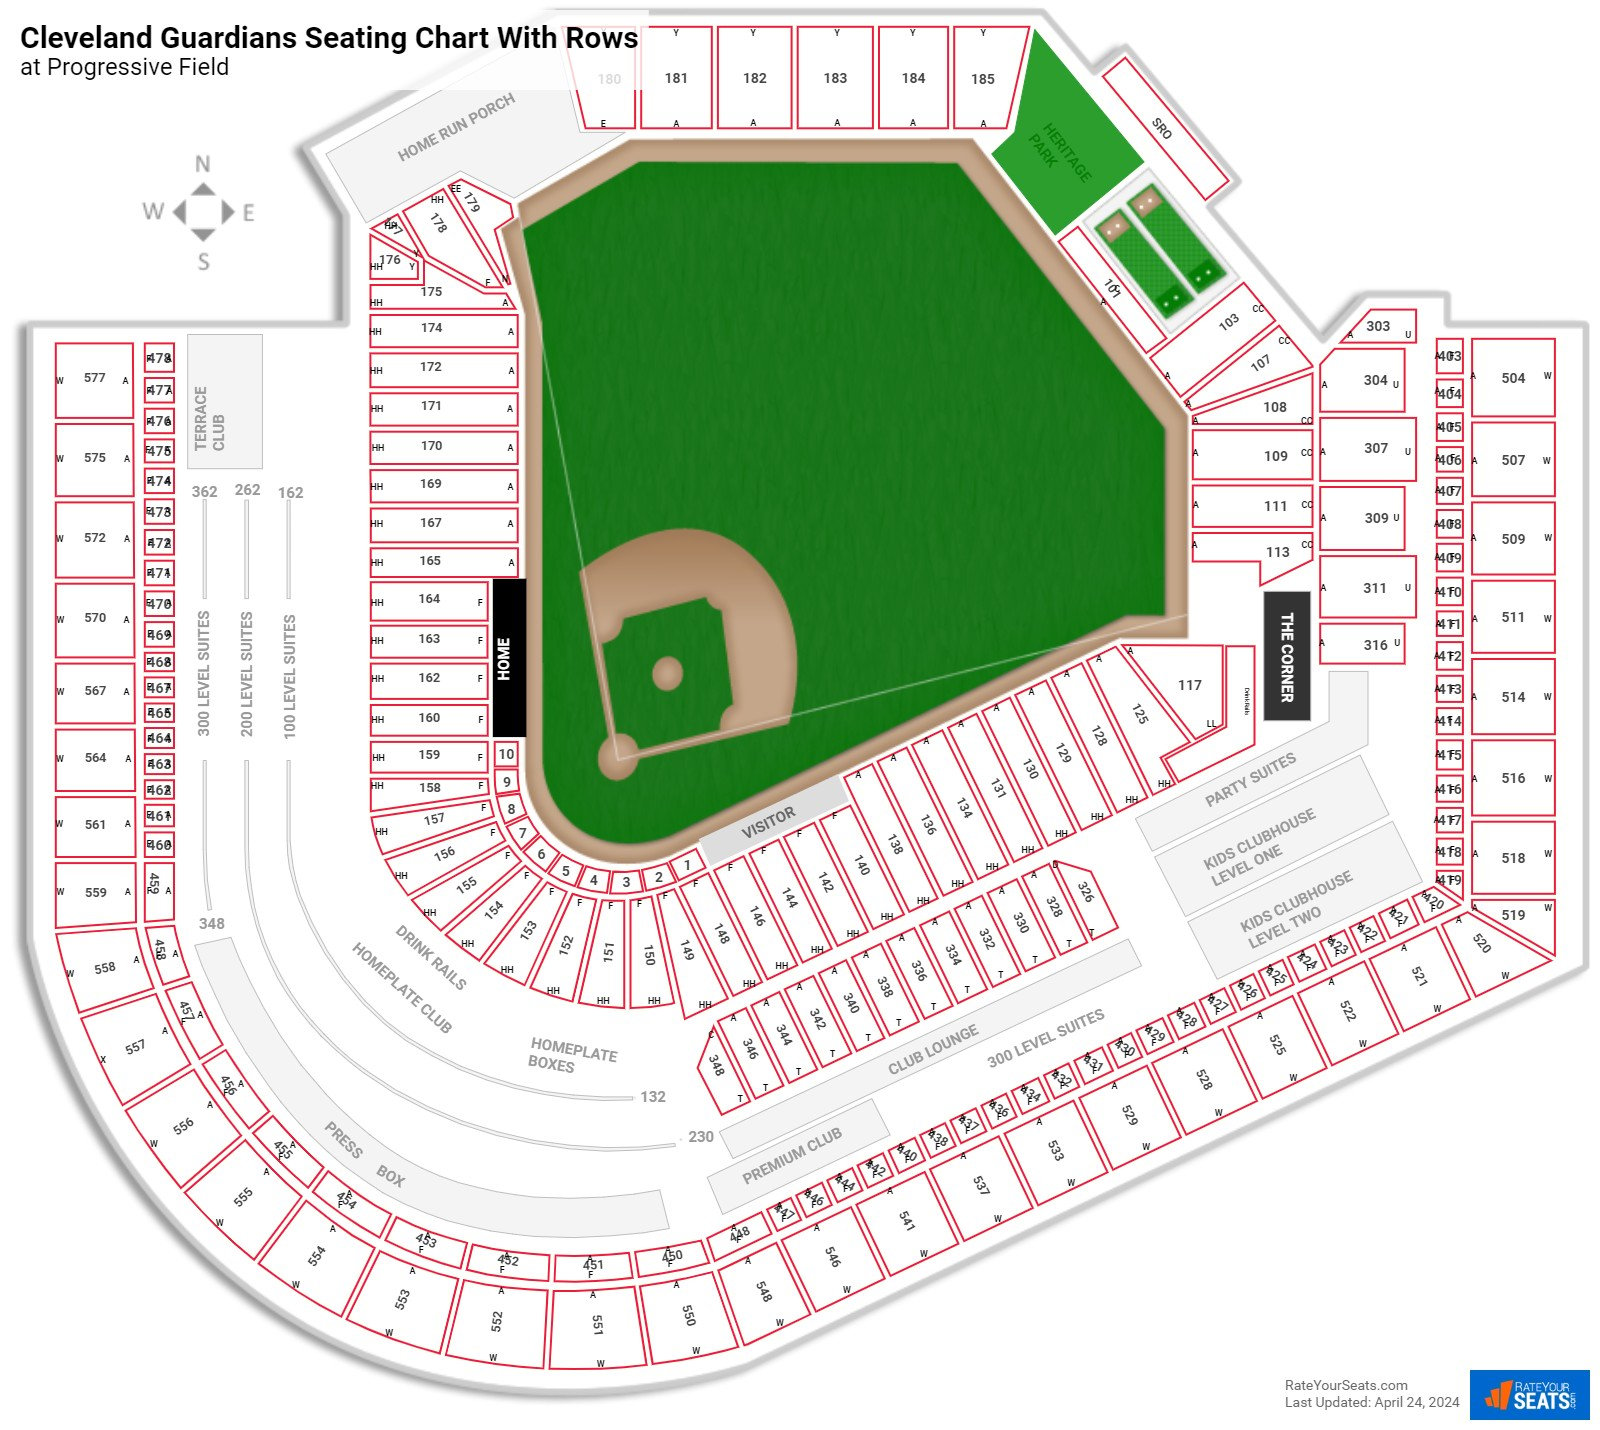 Progressive Field seating chart with row numbers